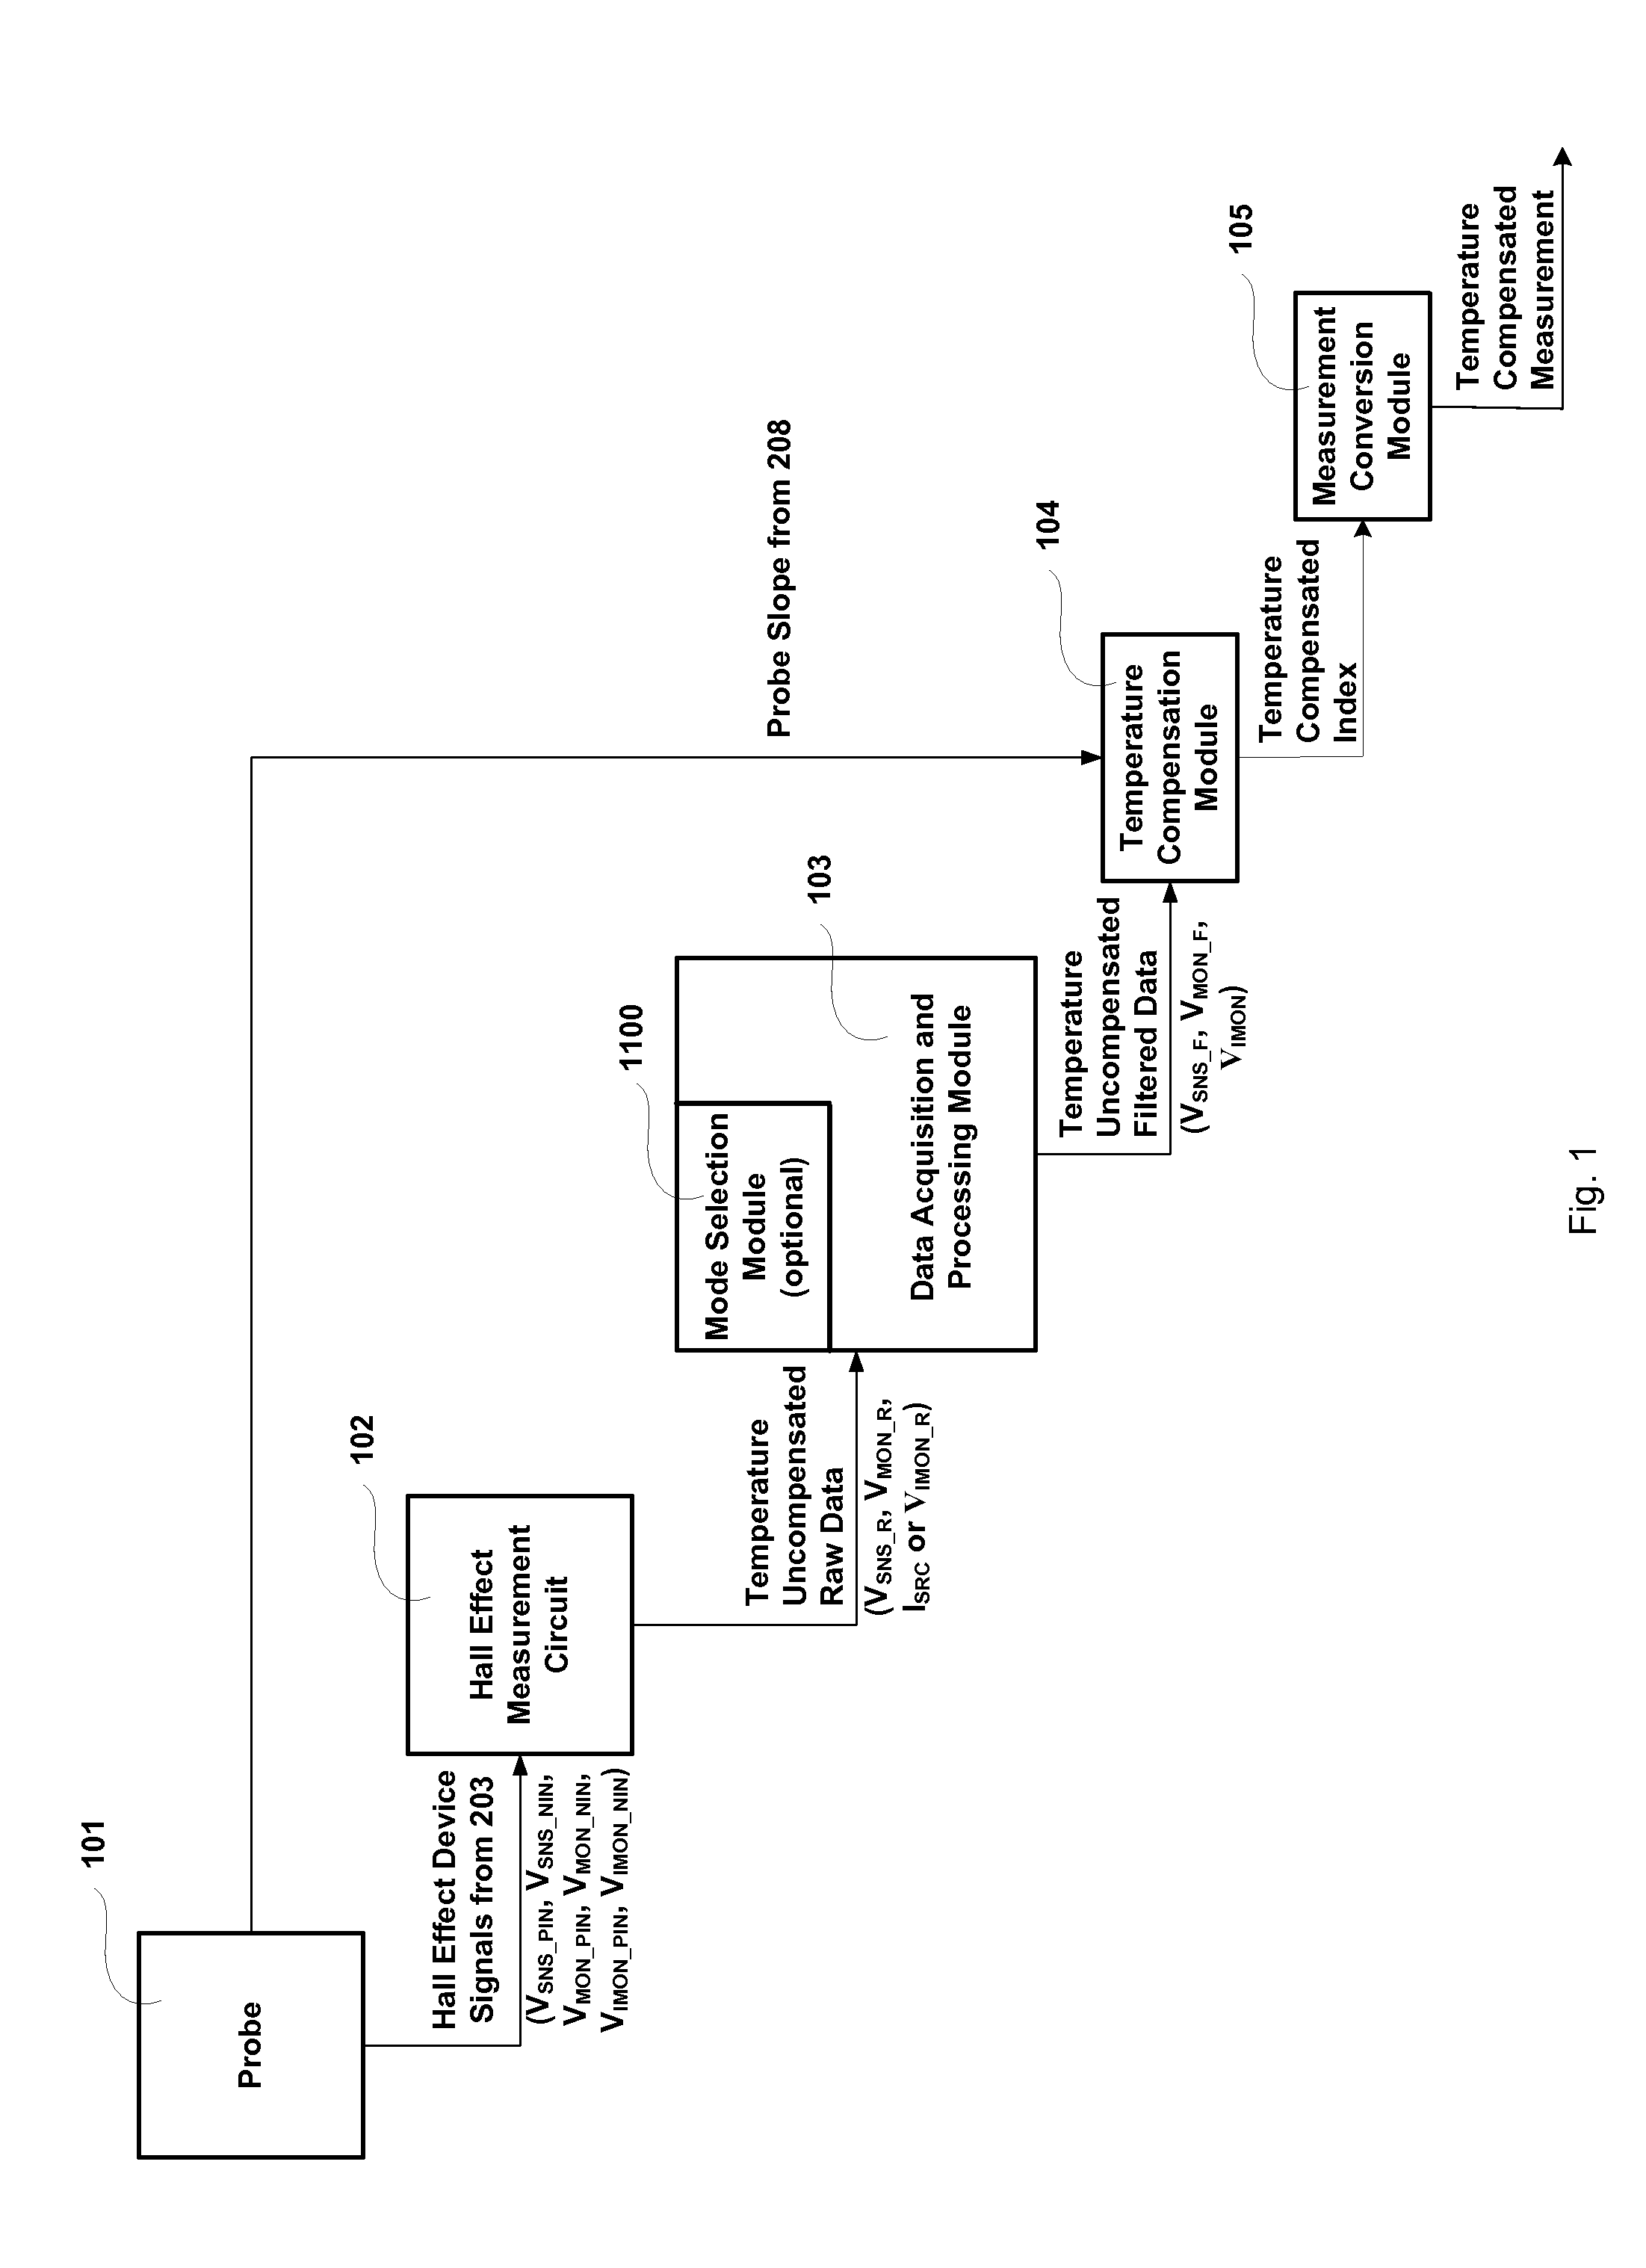 Hall effect measurement instrument with temperature compensation